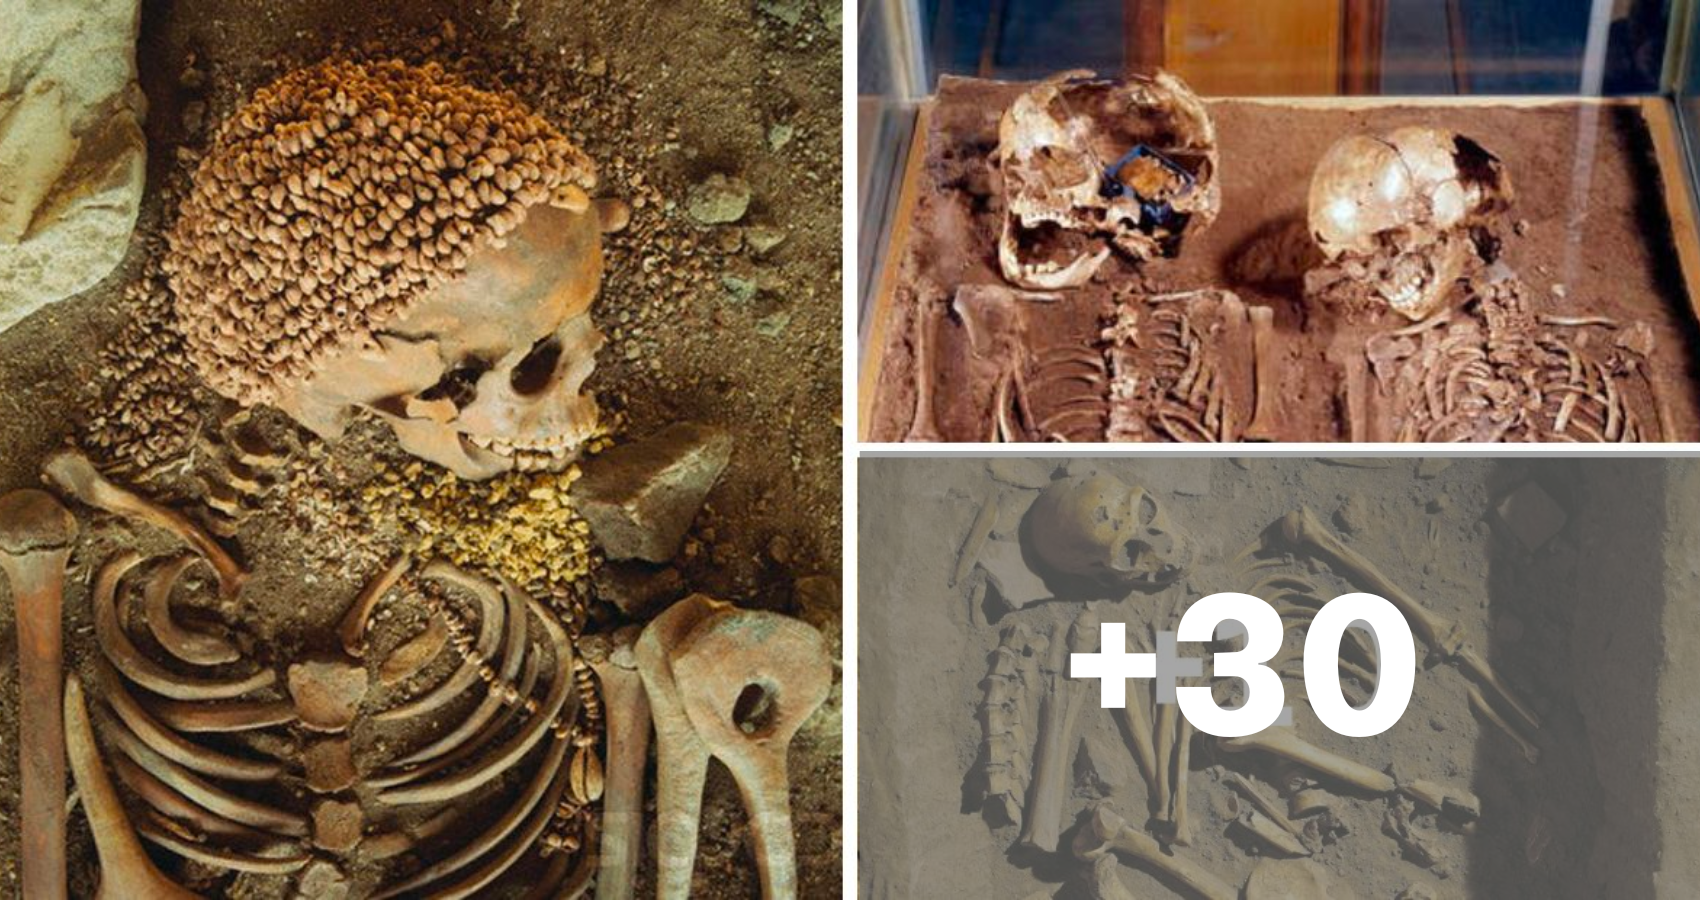 Man’s Skeleton Surrounded By Hundreds Of Perforated Seashells Found, Sheds Light On The Horrific Ancient Burial Rituals